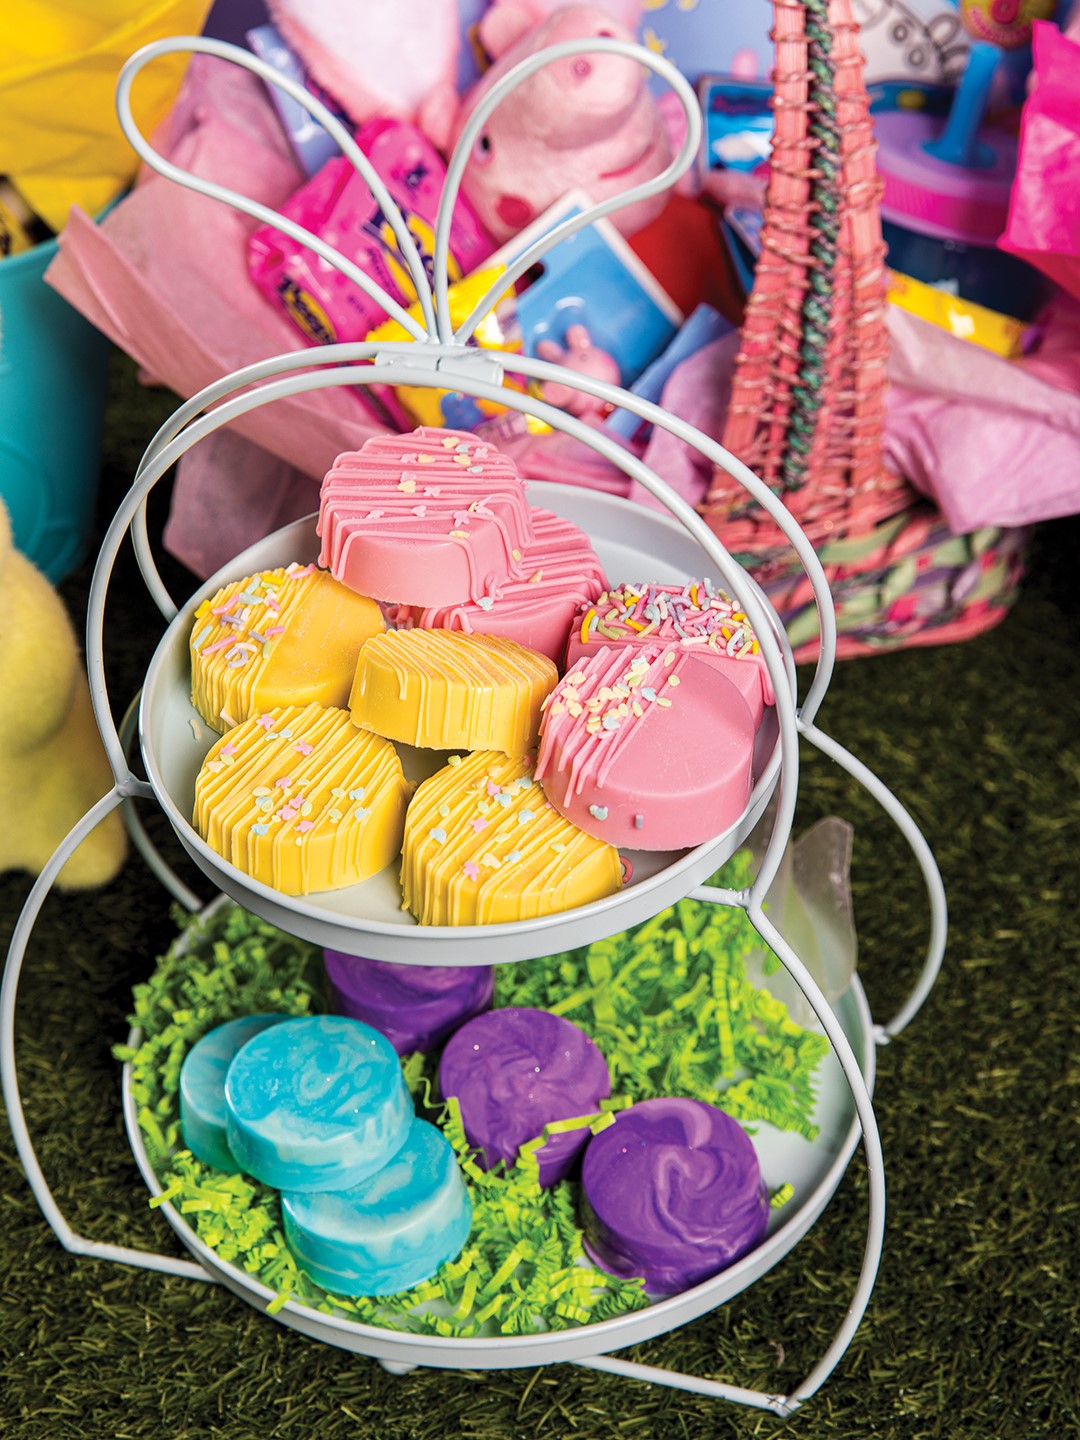 Through her business, The Dessert Table, Woodbury resident Jessie Takkunen creates chocolate-dipped Oreos and marshmallows, chocolate covered pretzels, specialized Easter baskets and more.